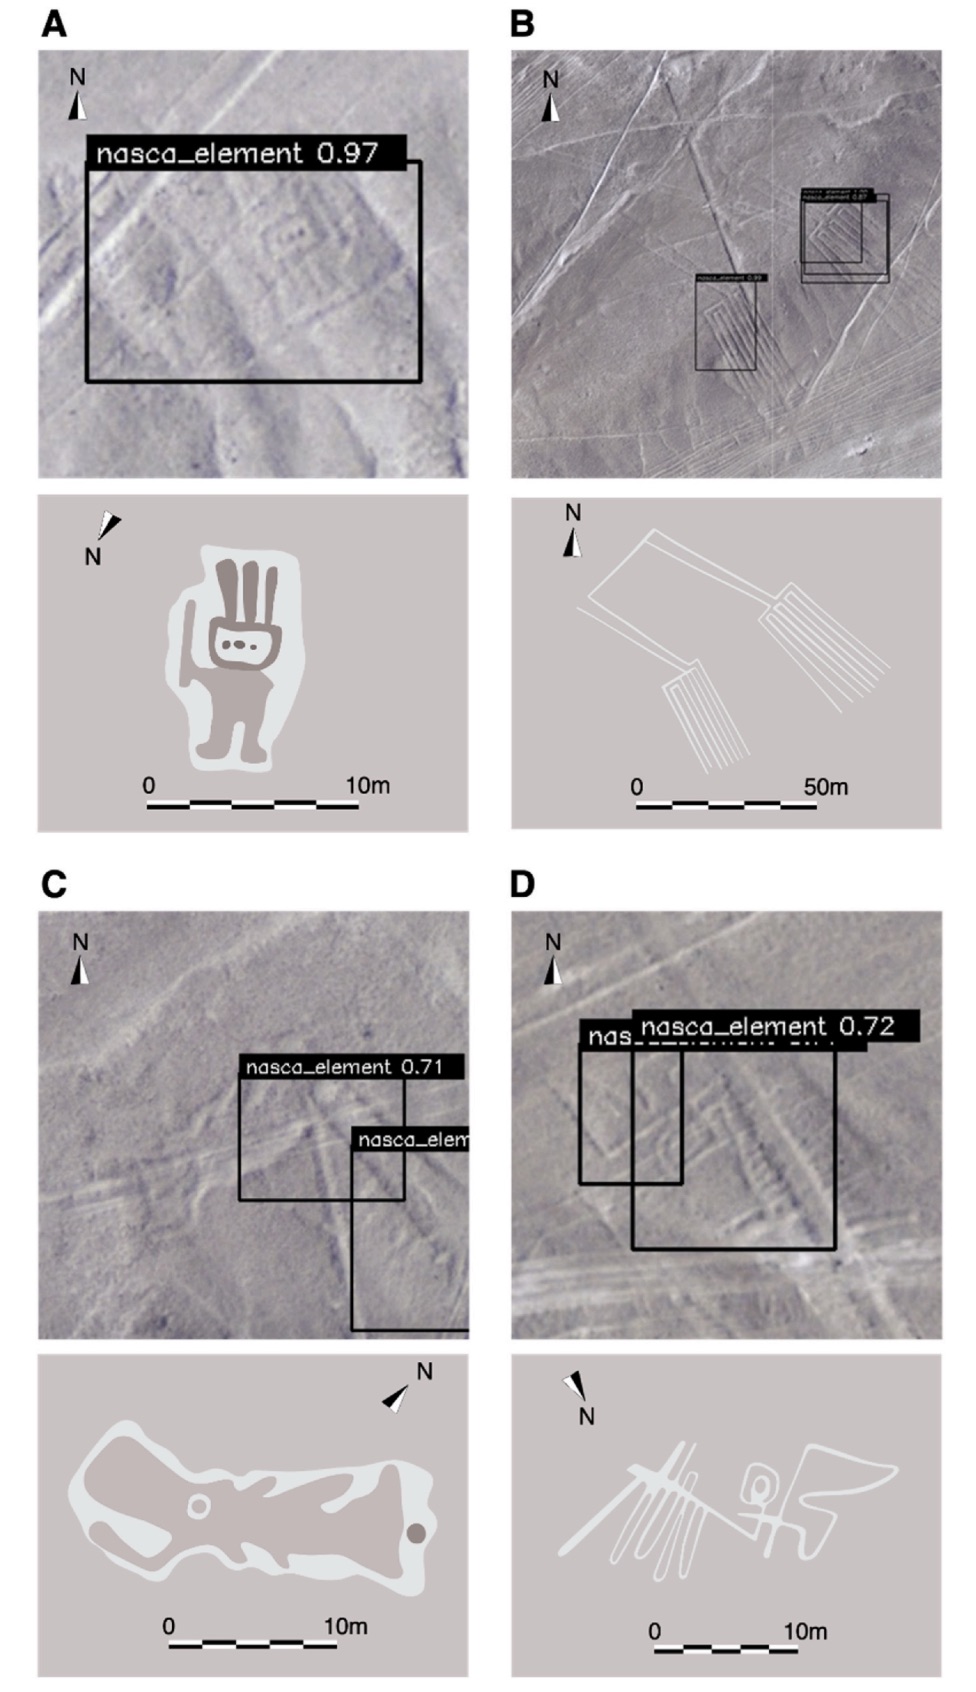 Four Nazca lines found with the help of AI.